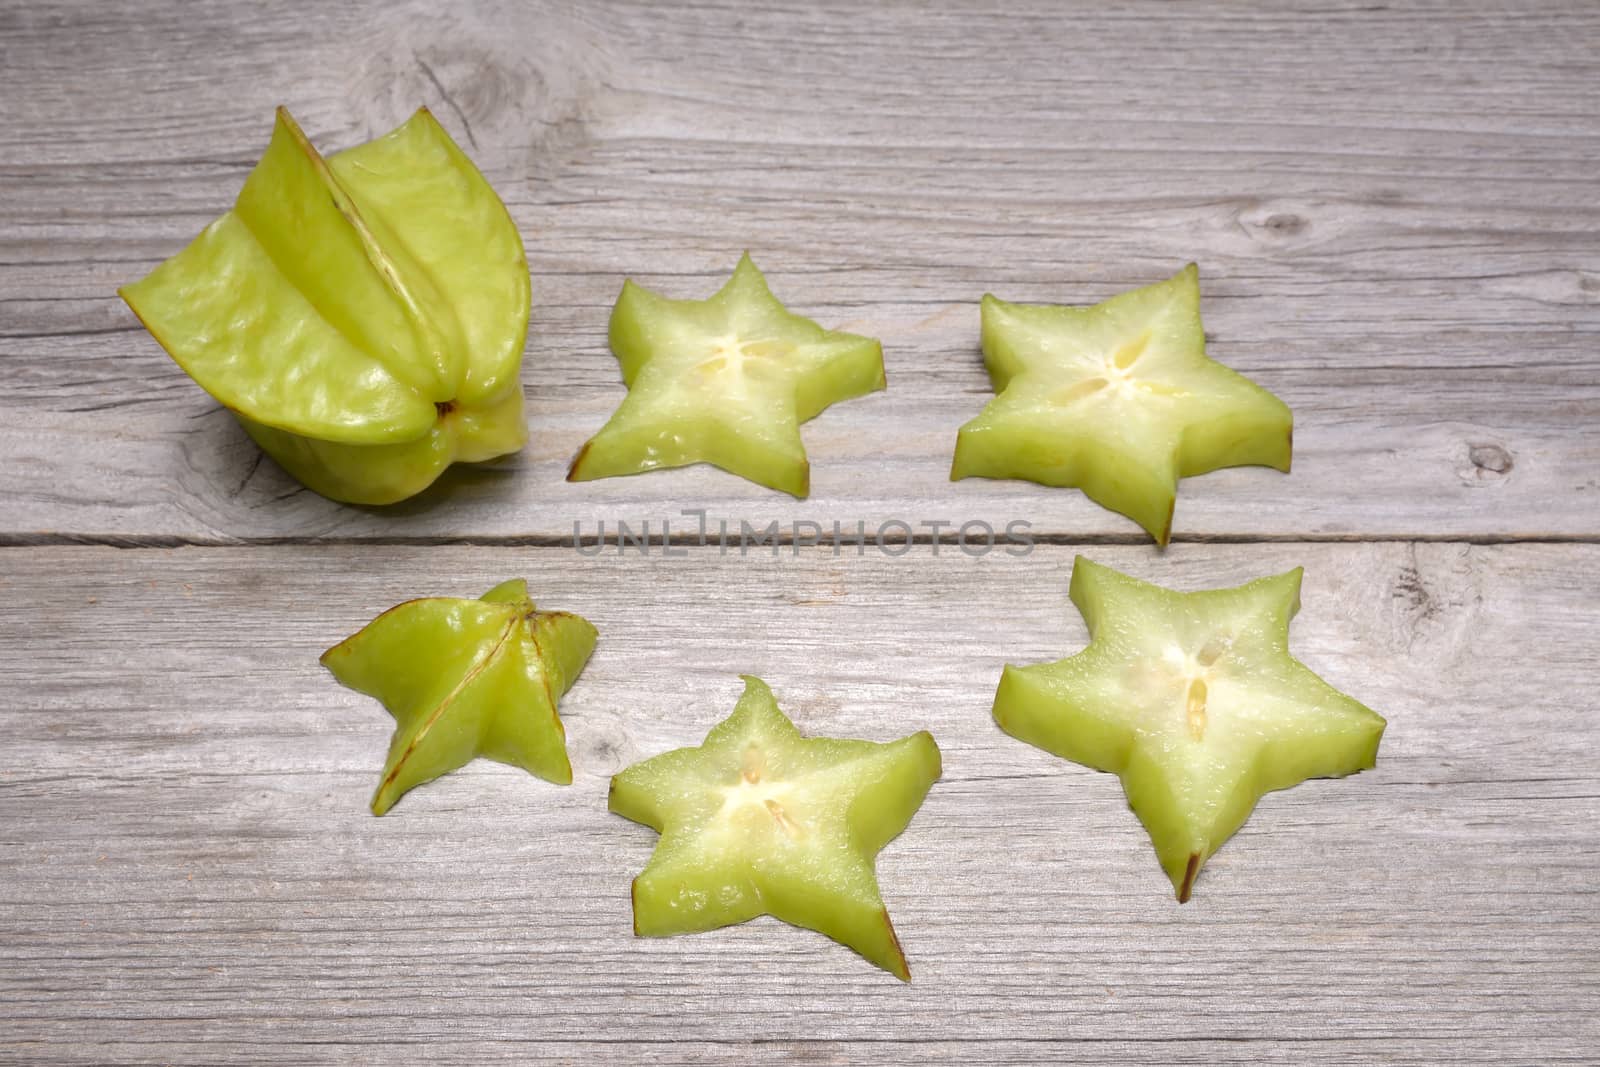 Star fruit - carambola isolated on wooden table by comet